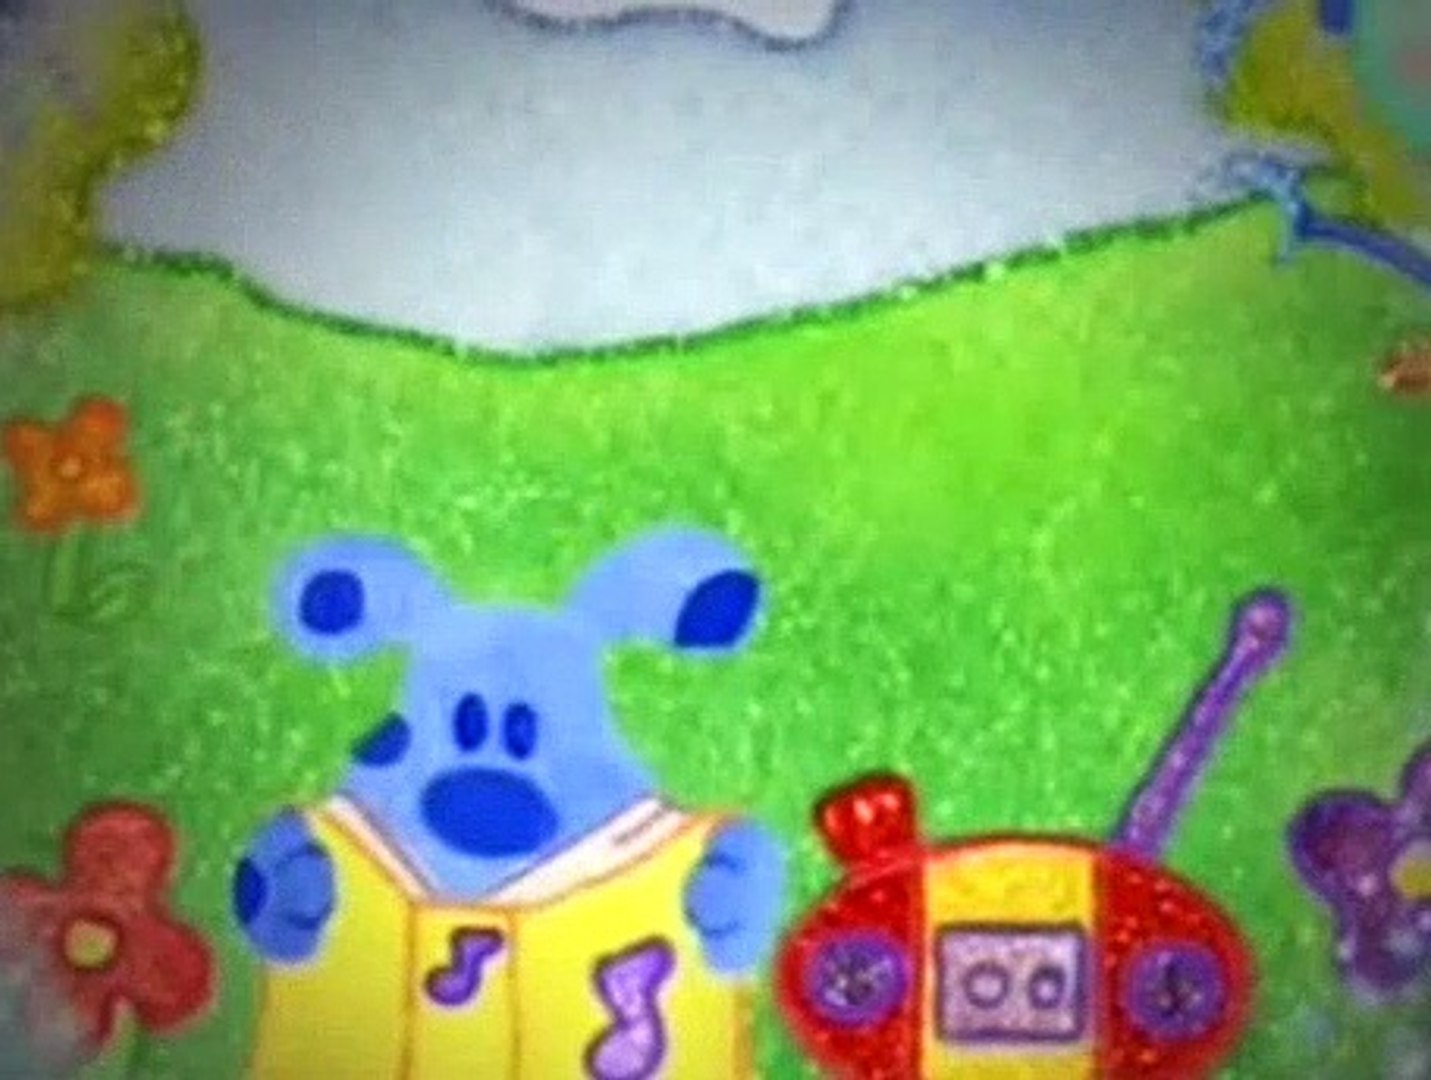 Blues clues the legend of the blue puppy